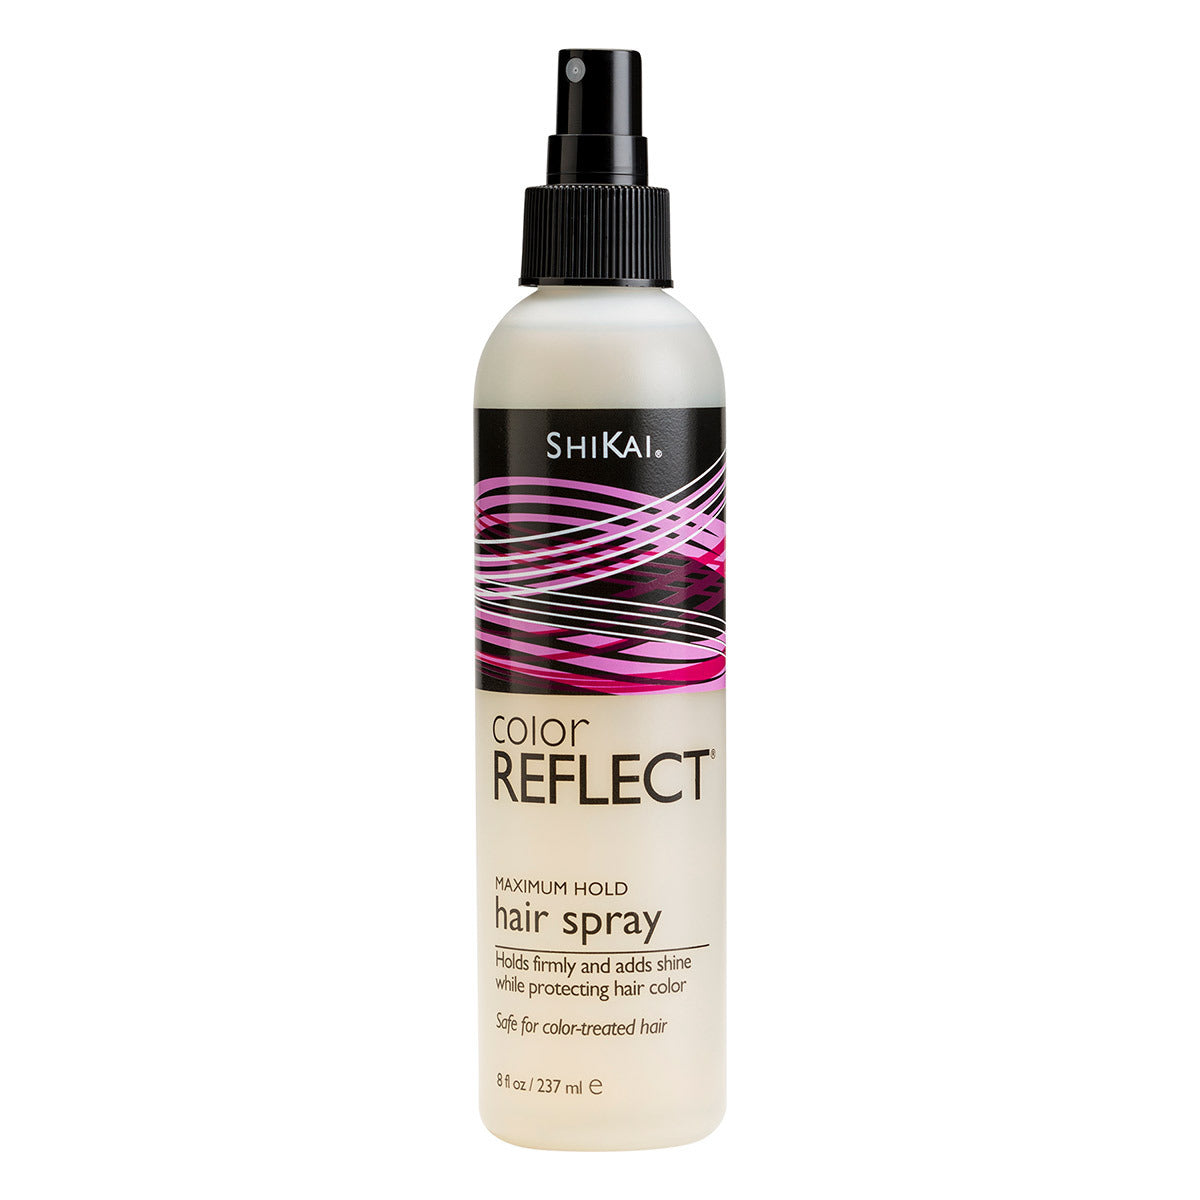 Primary image of Color Reflect Maximum Hold Hair Spray